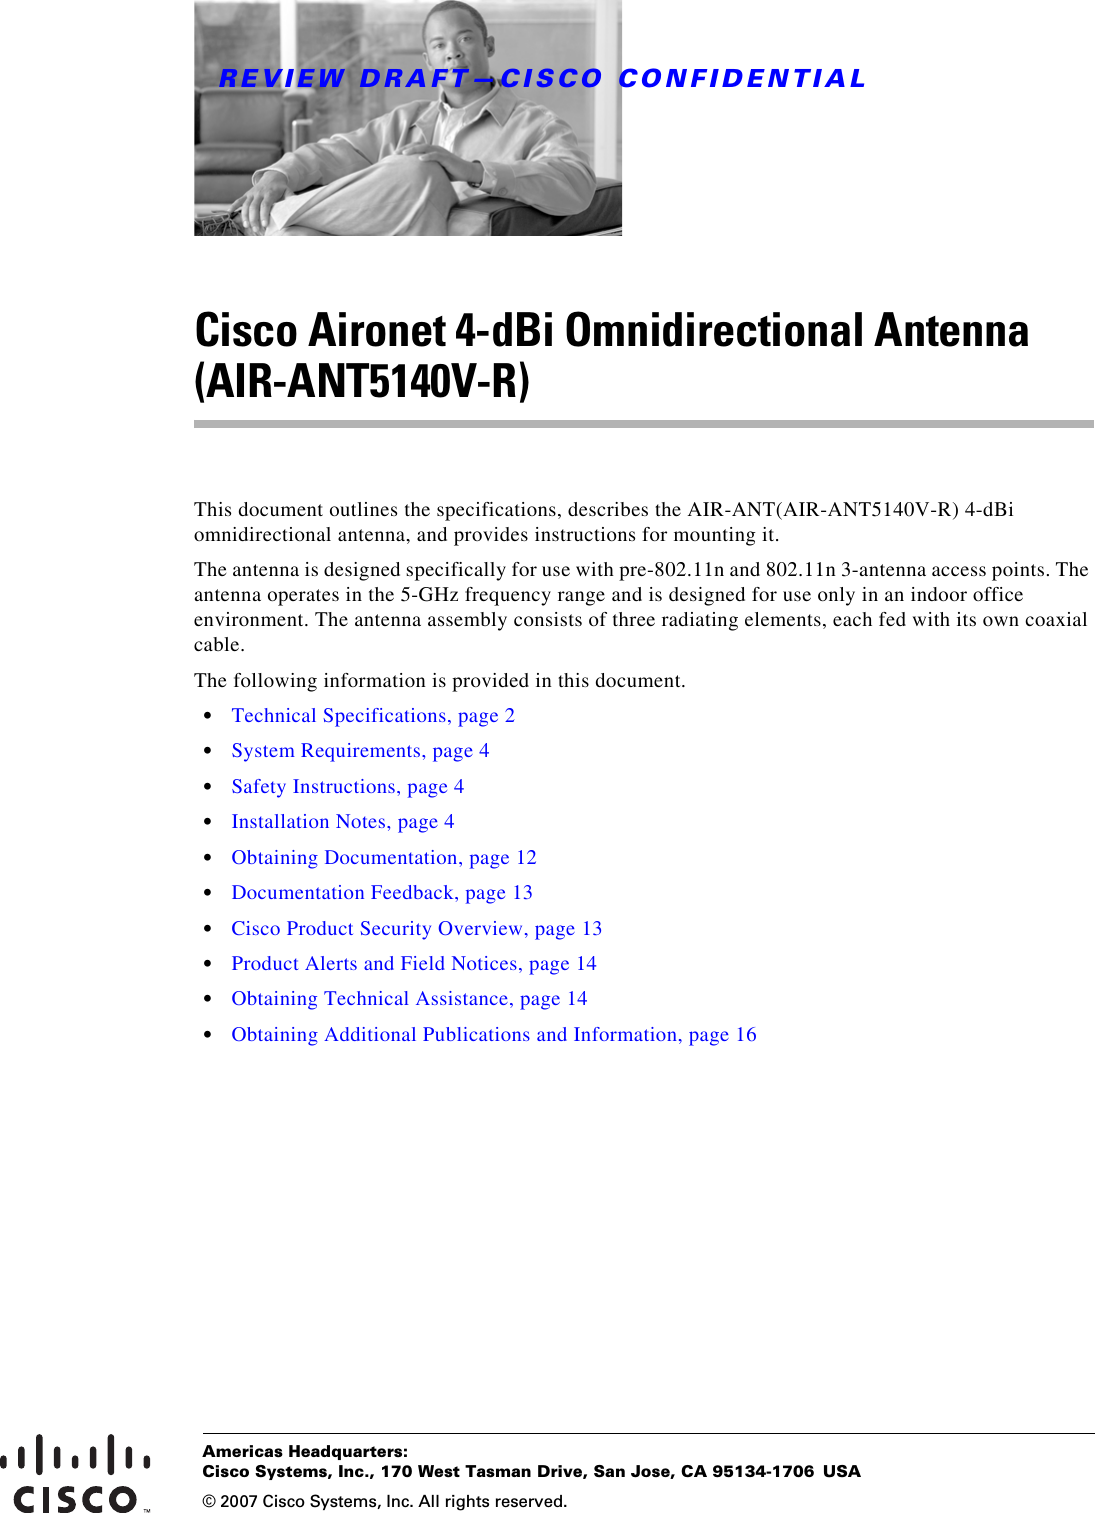 REVIEW DRAFT—CISCO CONFIDENTIALAmericas Headquarters:© 2007 Cisco Systems, Inc. All rights reserved.Cisco Systems, Inc., 170 West Tasman Drive, San Jose, CA 95134-1706 USACisco Aironet 4-dBi Omnidirectional Antenna (AIR-ANT5140V-R)This document outlines the specifications, describes the AIR-ANT(AIR-ANT5140V-R) 4-dBi omnidirectional antenna, and provides instructions for mounting it. The antenna is designed specifically for use with pre-802.11n and 802.11n 3-antenna access points. The antenna operates in the 5-GHz frequency range and is designed for use only in an indoor office environment. The antenna assembly consists of three radiating elements, each fed with its own coaxial cable.The following information is provided in this document.•Technical Specifications, page 2•System Requirements, page 4•Safety Instructions, page 4•Installation Notes, page 4•Obtaining Documentation, page 12•Documentation Feedback, page 13•Cisco Product Security Overview, page 13•Product Alerts and Field Notices, page 14•Obtaining Technical Assistance, page 14•Obtaining Additional Publications and Information, page 16